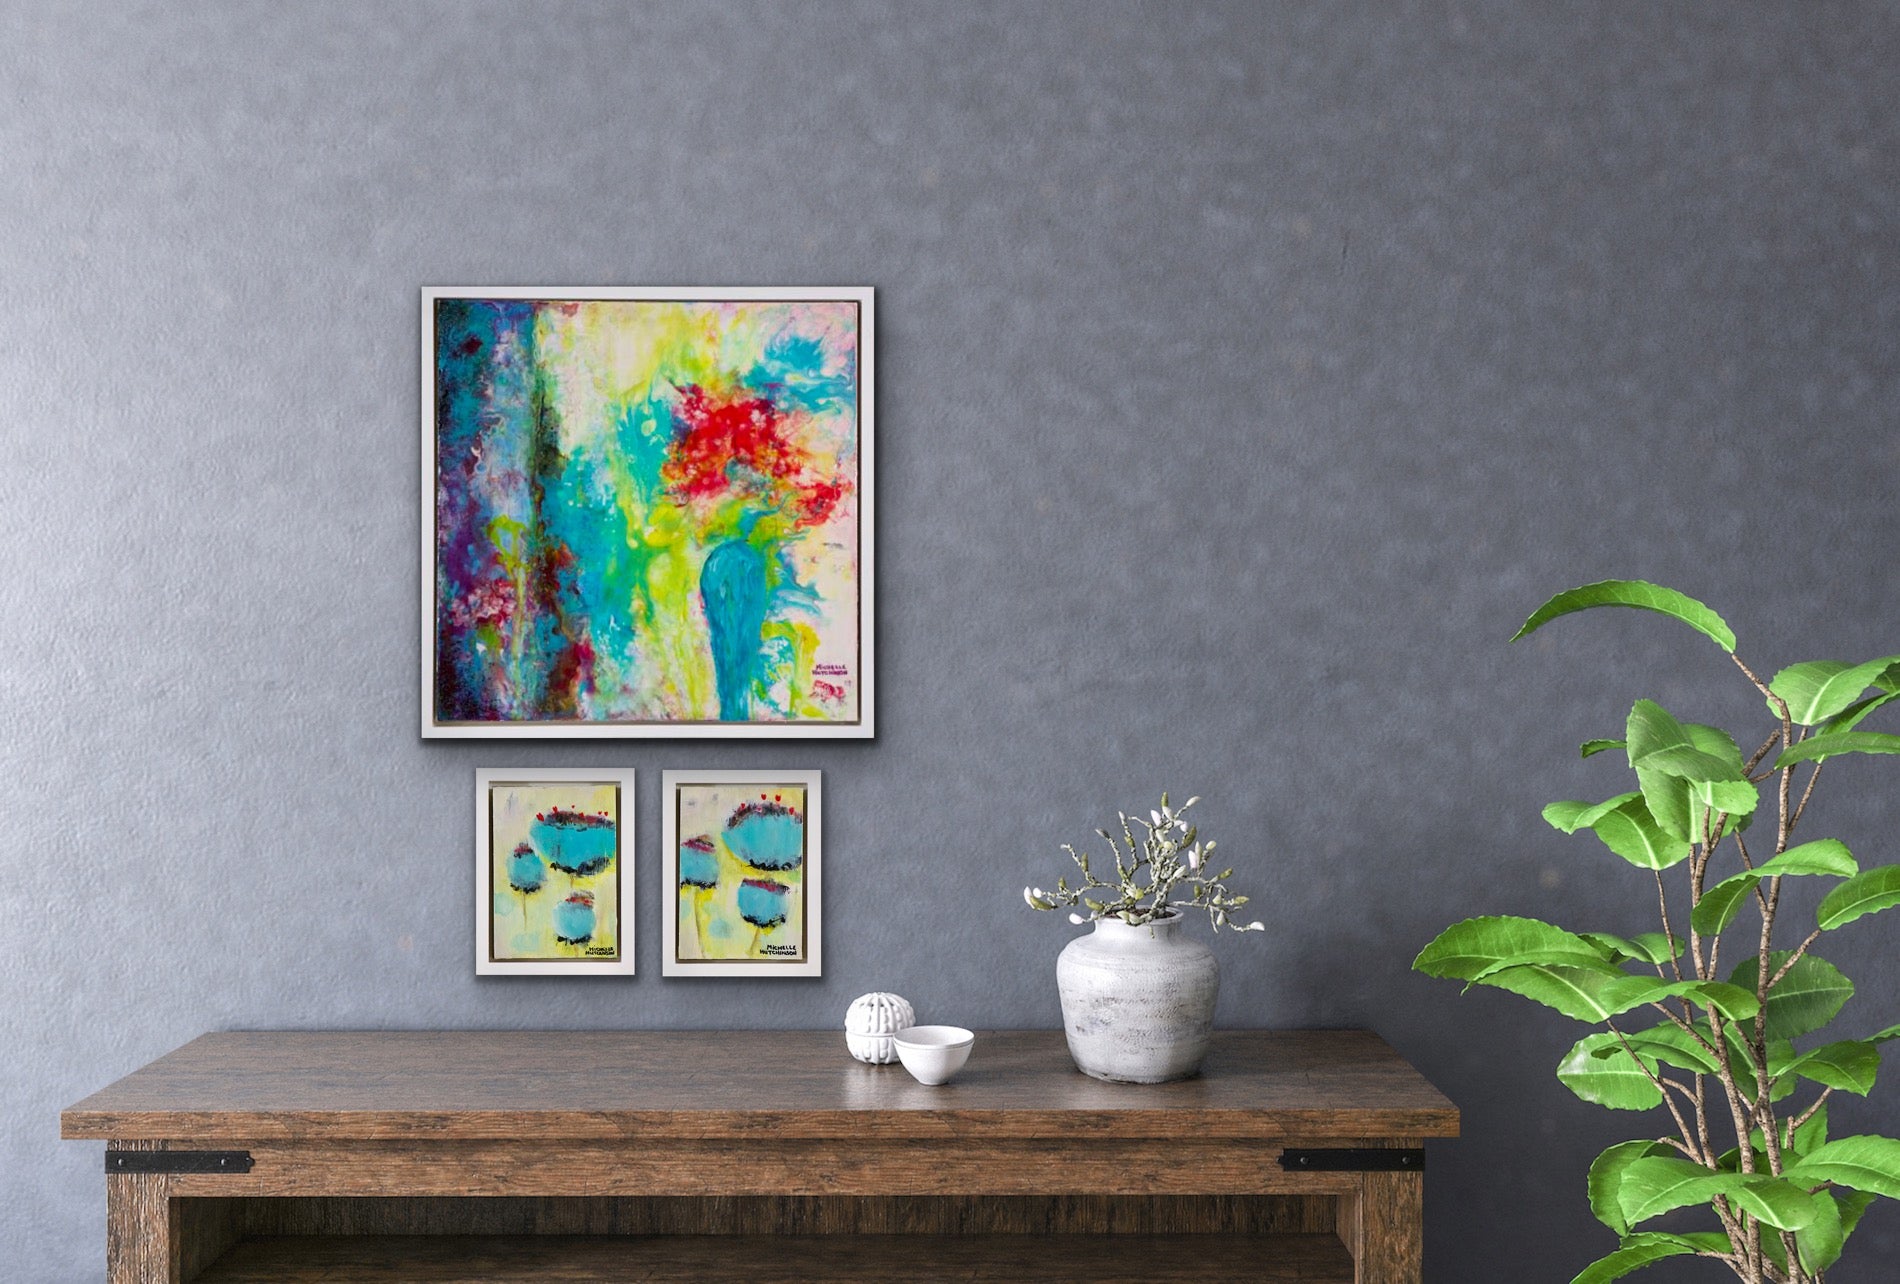 Offbeat and playful, this joyful original painting uses a technique called acrylic pouring. The red flowers sit within a teal vase beside blue drapes, inviting the viewer to gaze into the heart of love. It has a glossy finish. Displayed on a grey wall with two mini paintings above a console table.